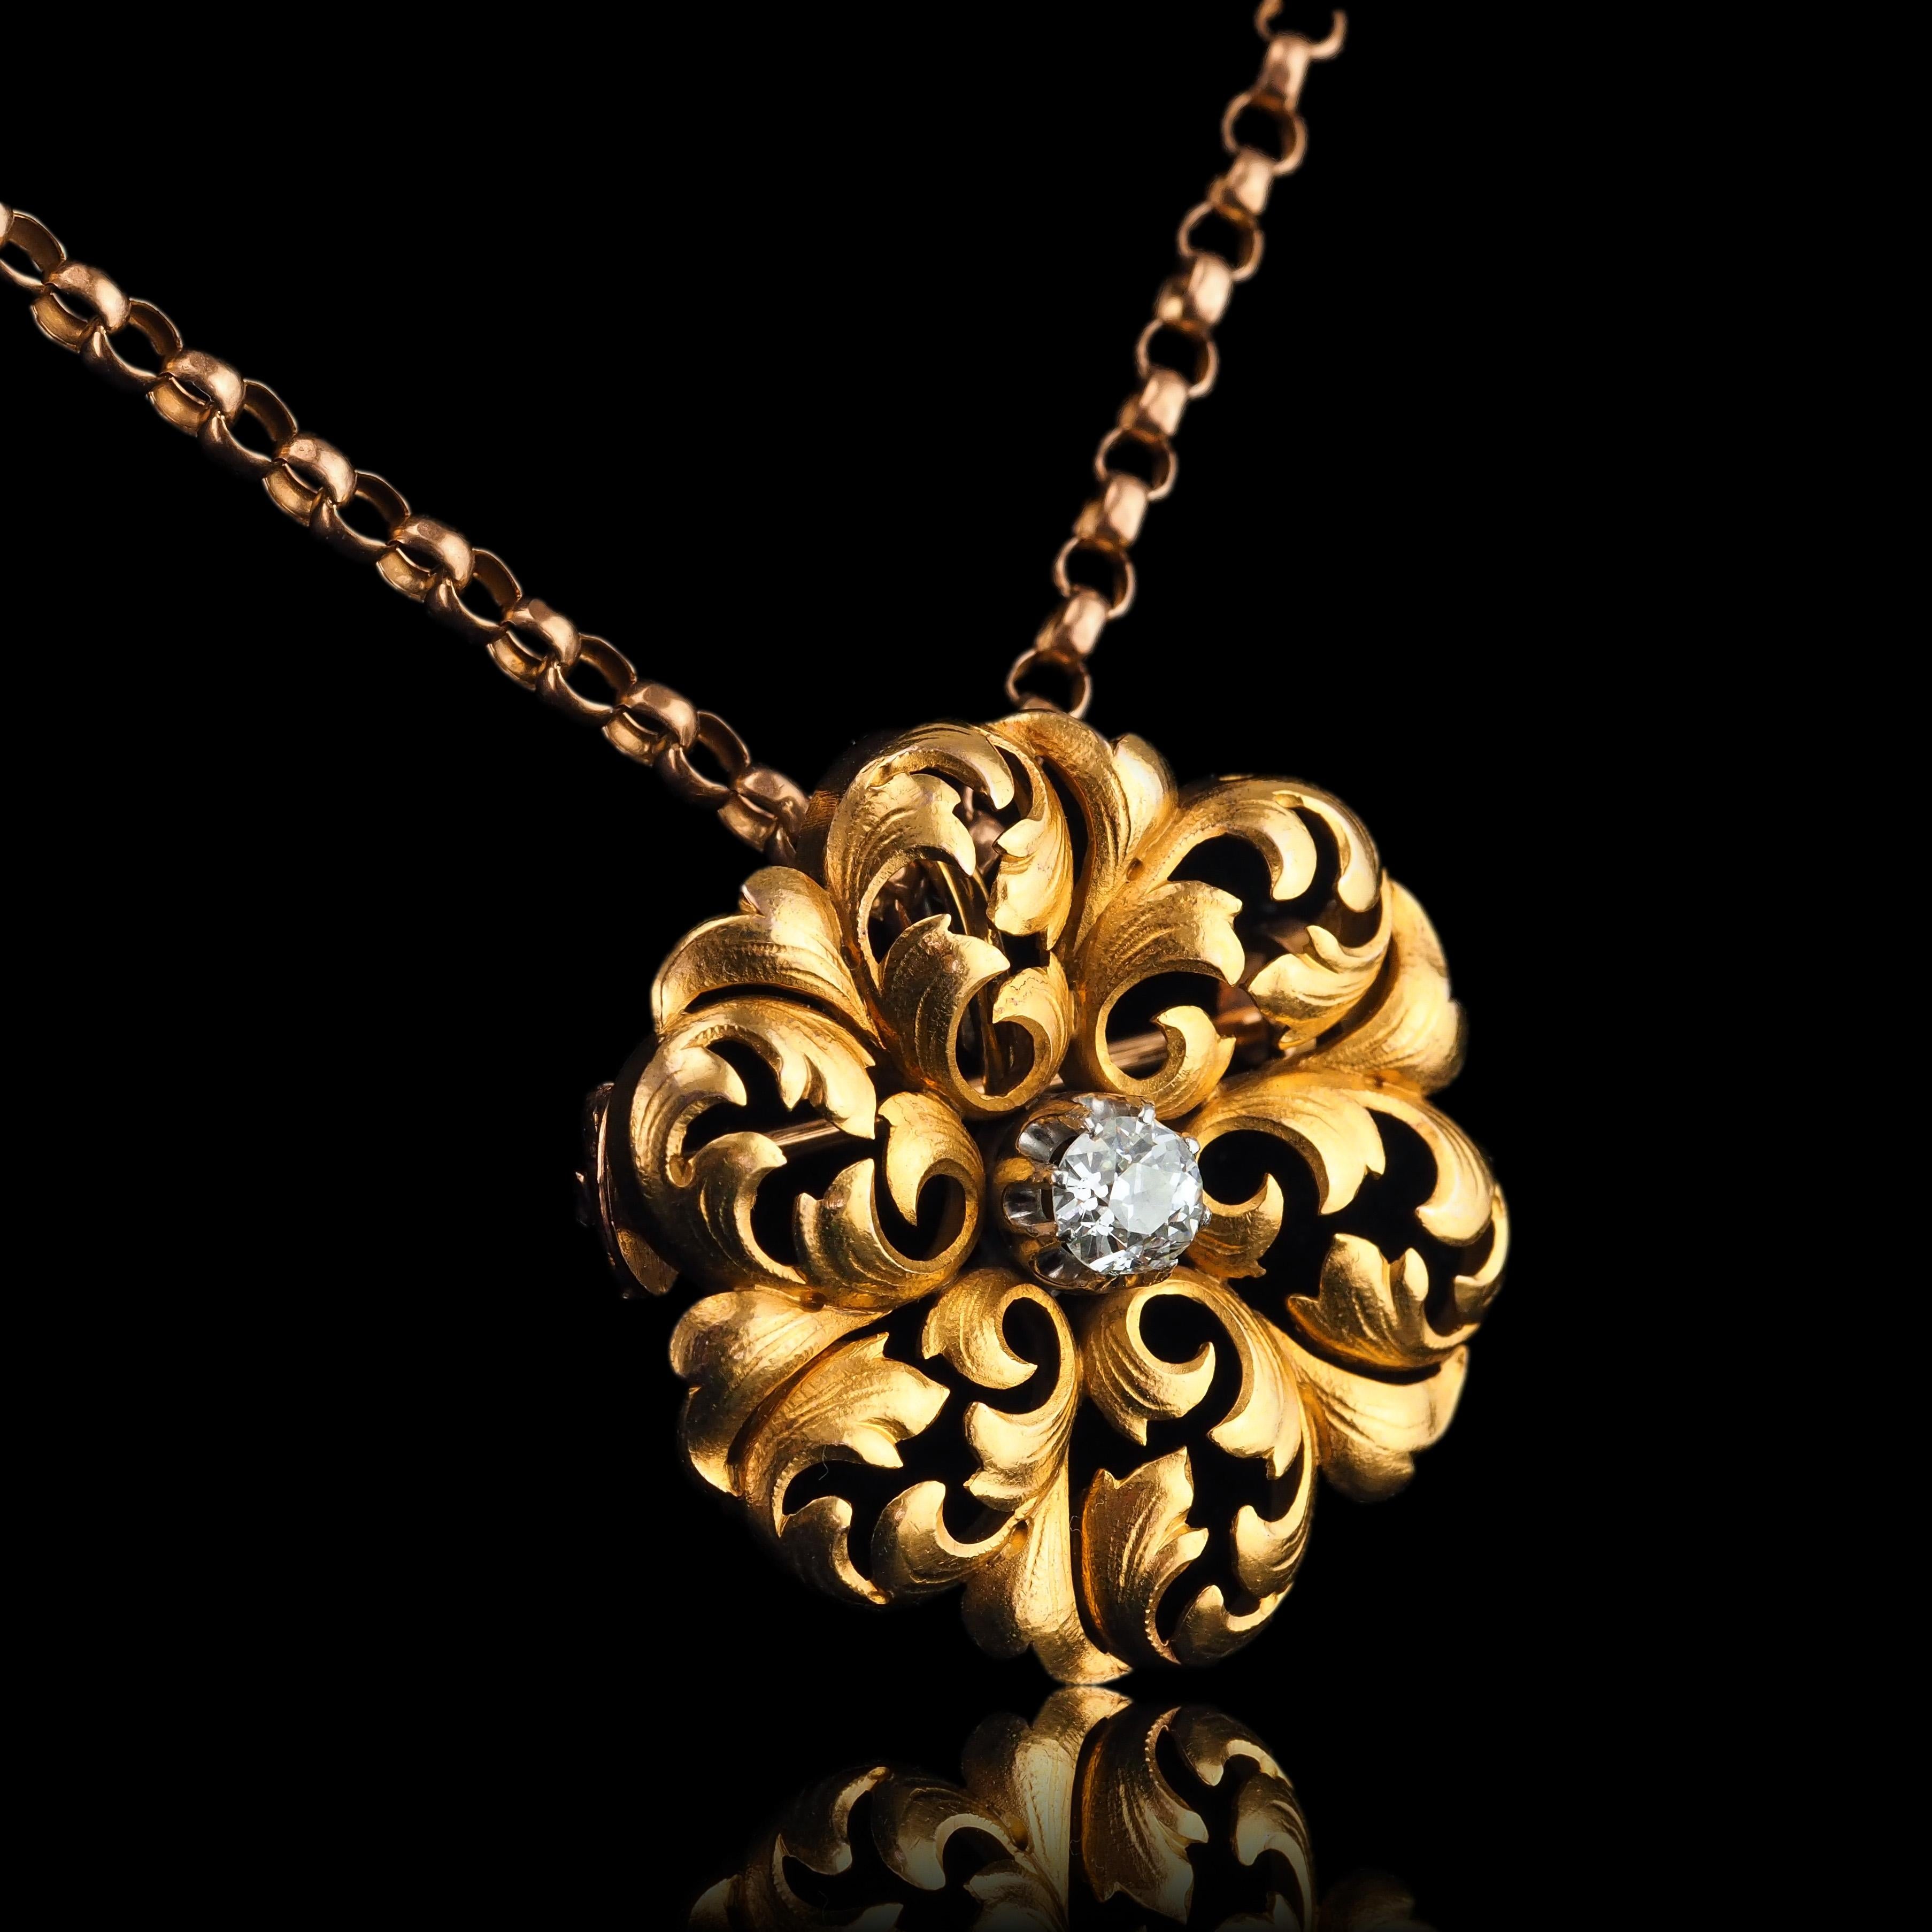 Antique French Diamond Necklace 18K Gold Pendant Brooch 19th C. Flower Acanthus For Sale 4